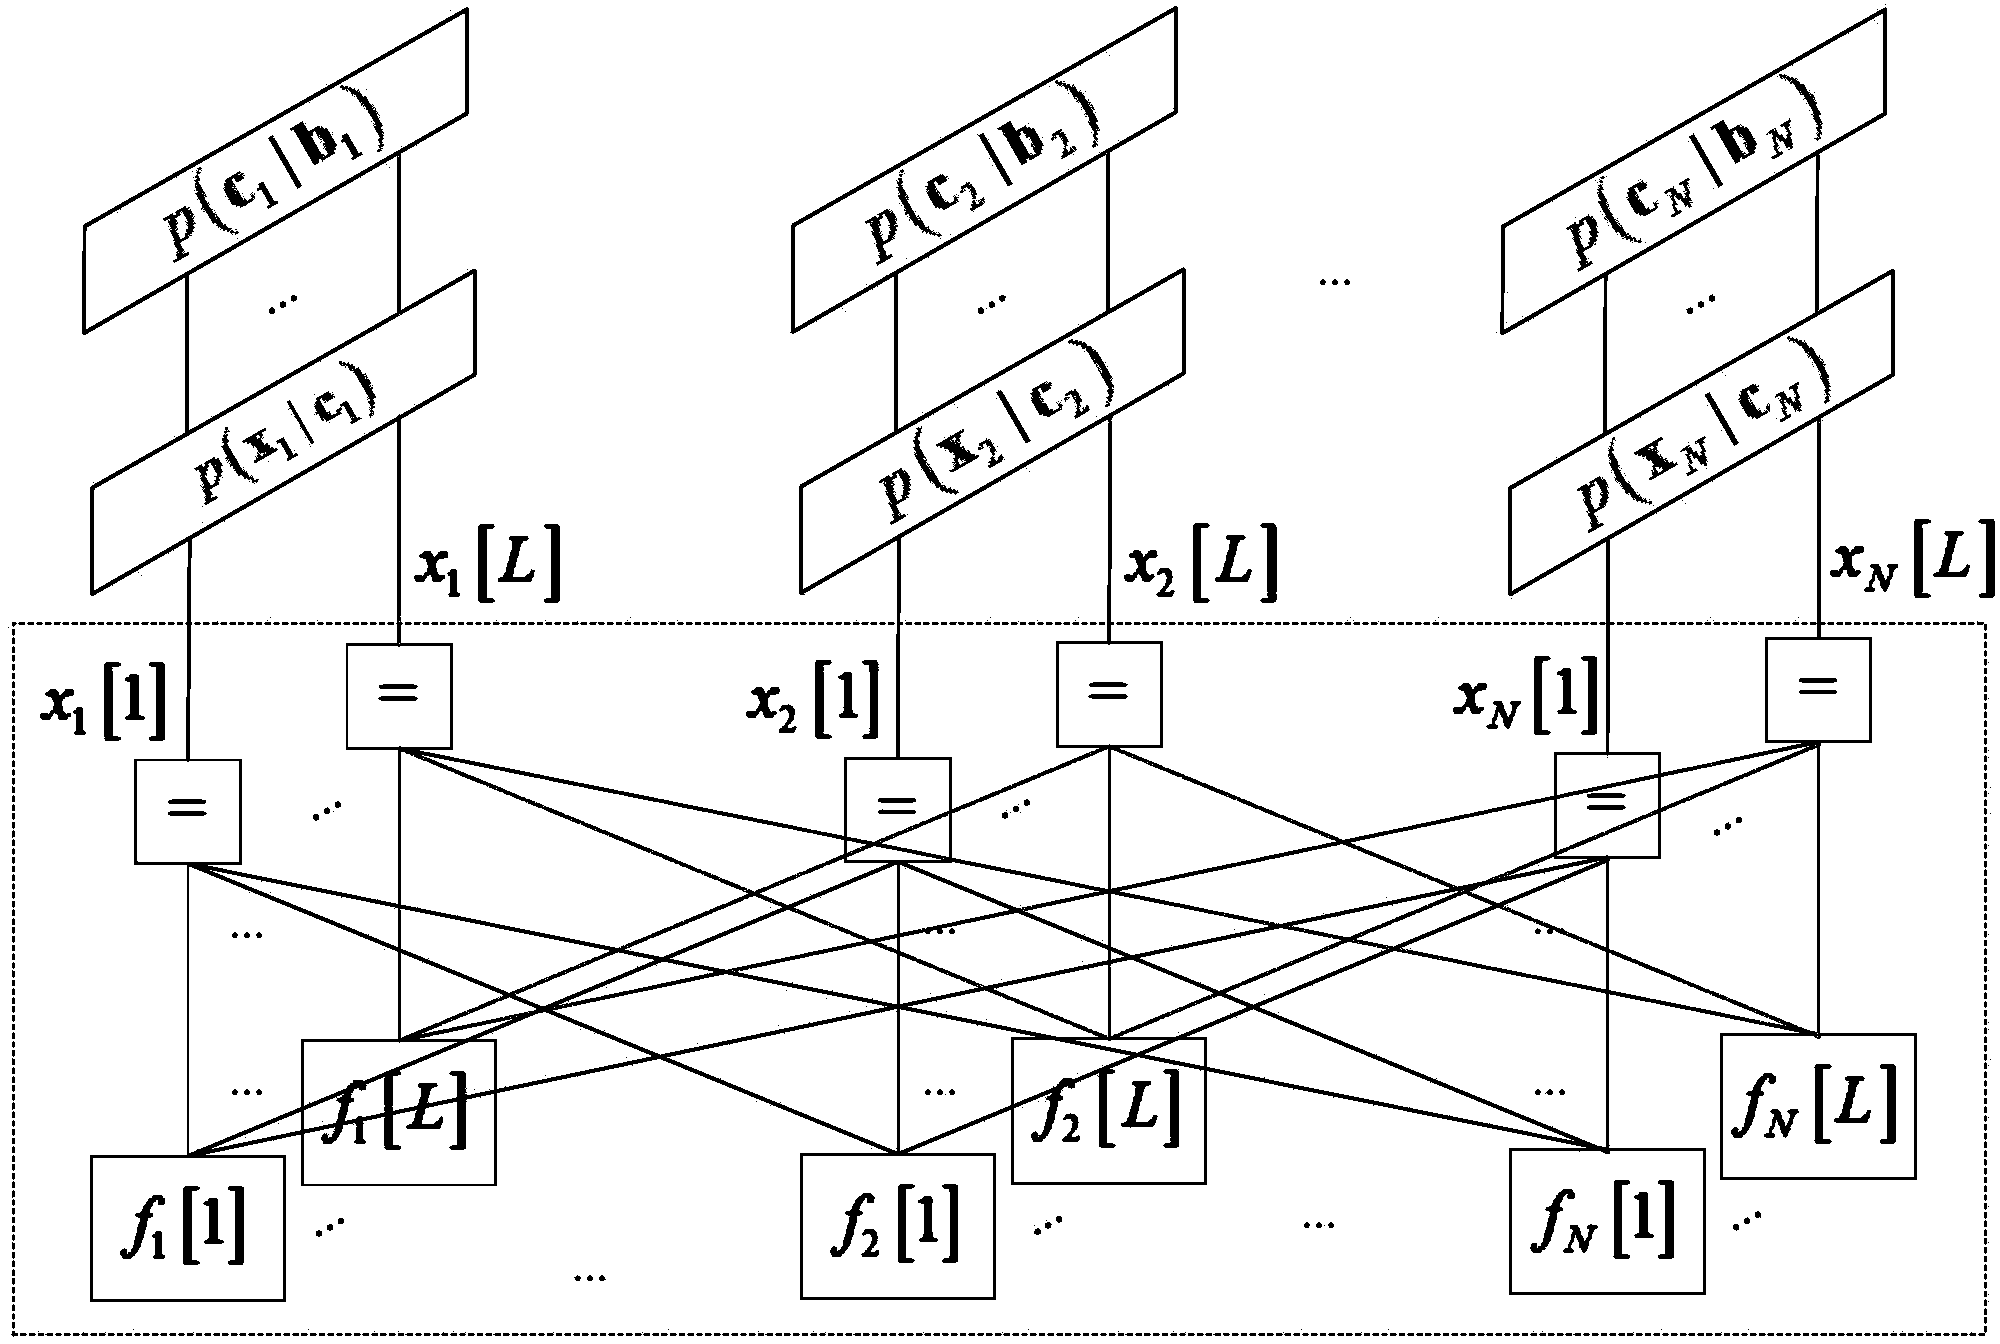 A joint multi-user detecting and decoding method based on a belief propagation algorithm